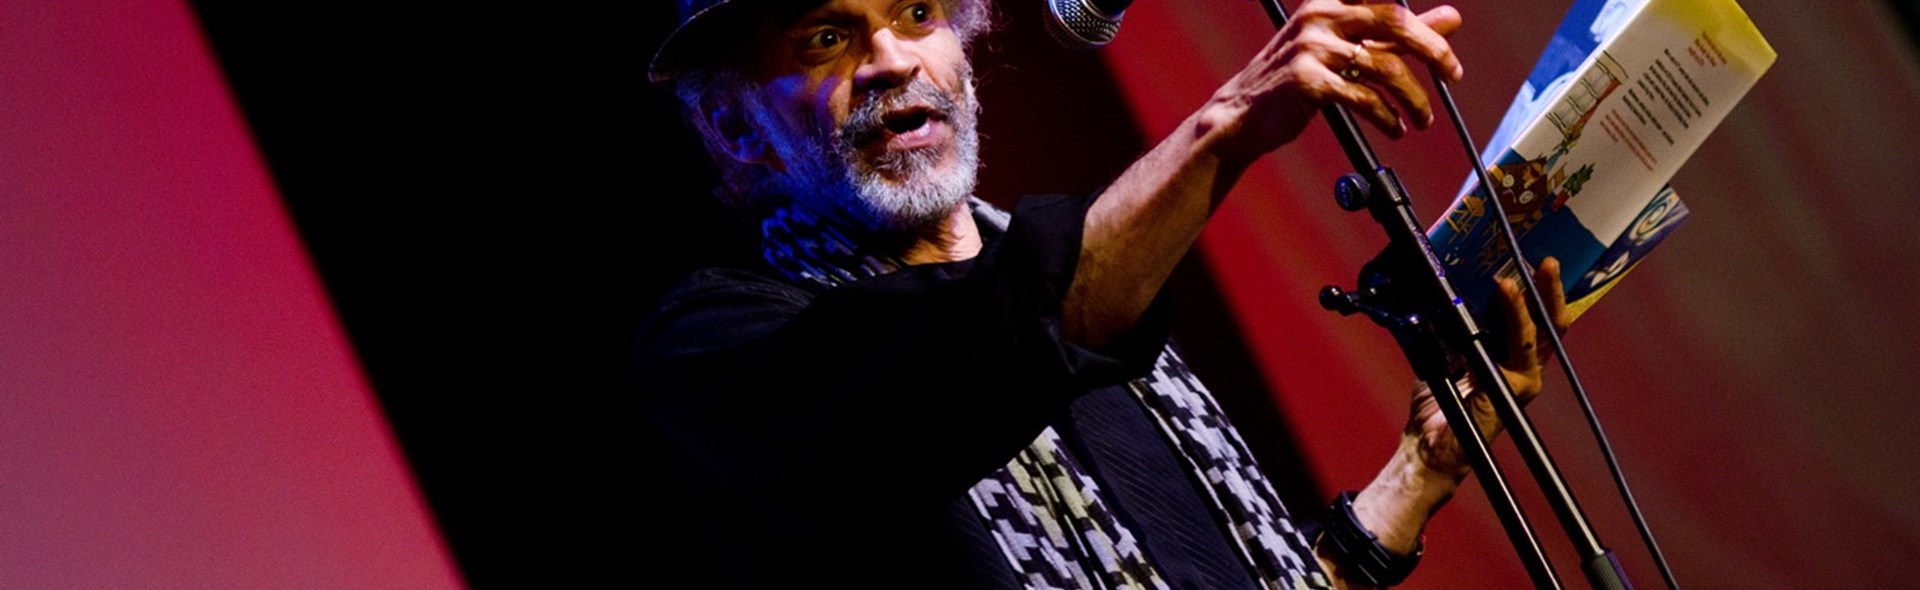 An Evening with John Agard from LLF24 and Renaissance One